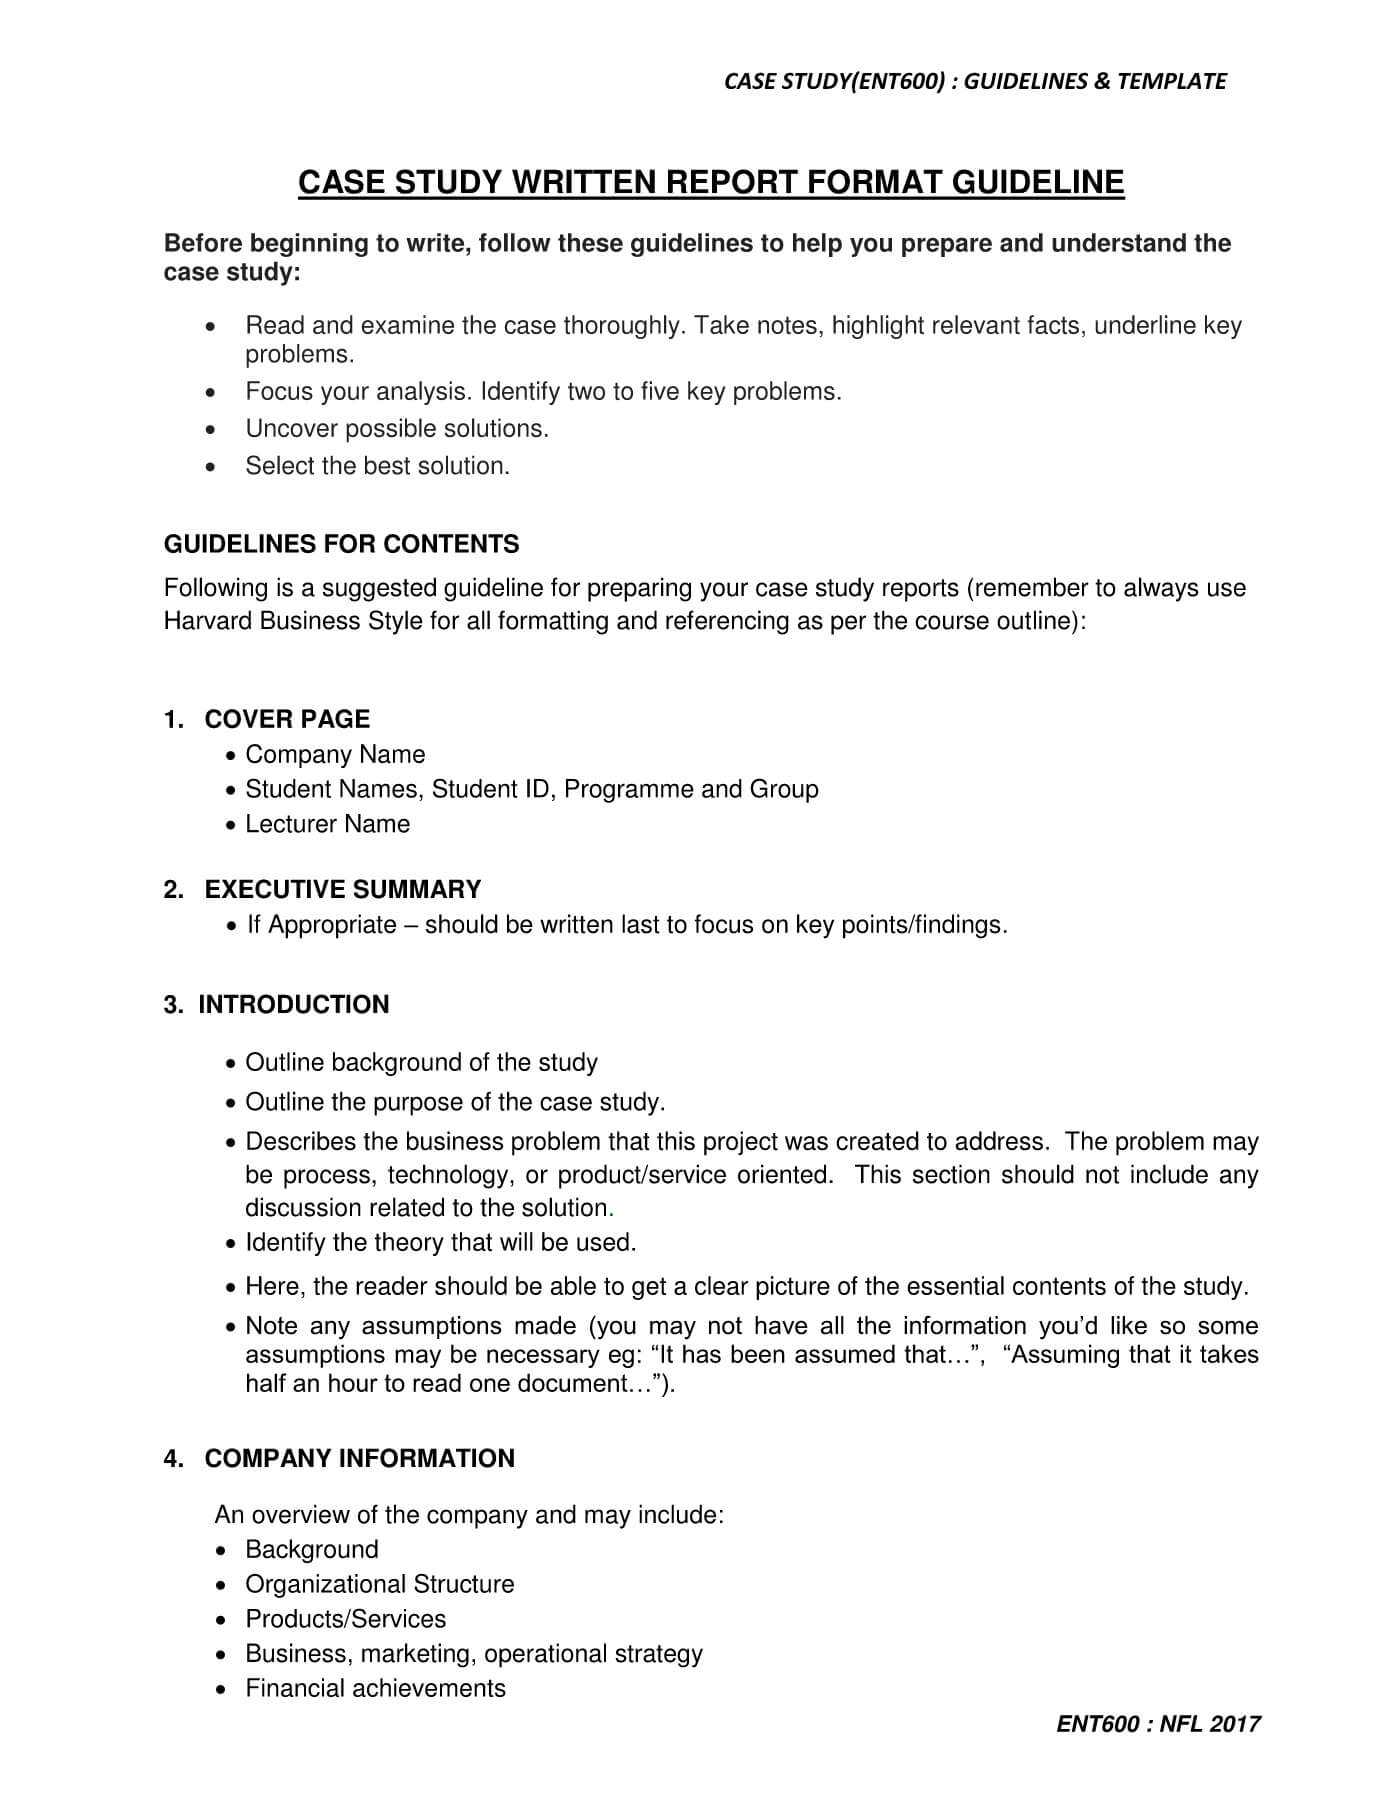 Ent600 Case Study Guidelines & Template Pages 1 – 5 – Text Pertaining To Report Content Page Template